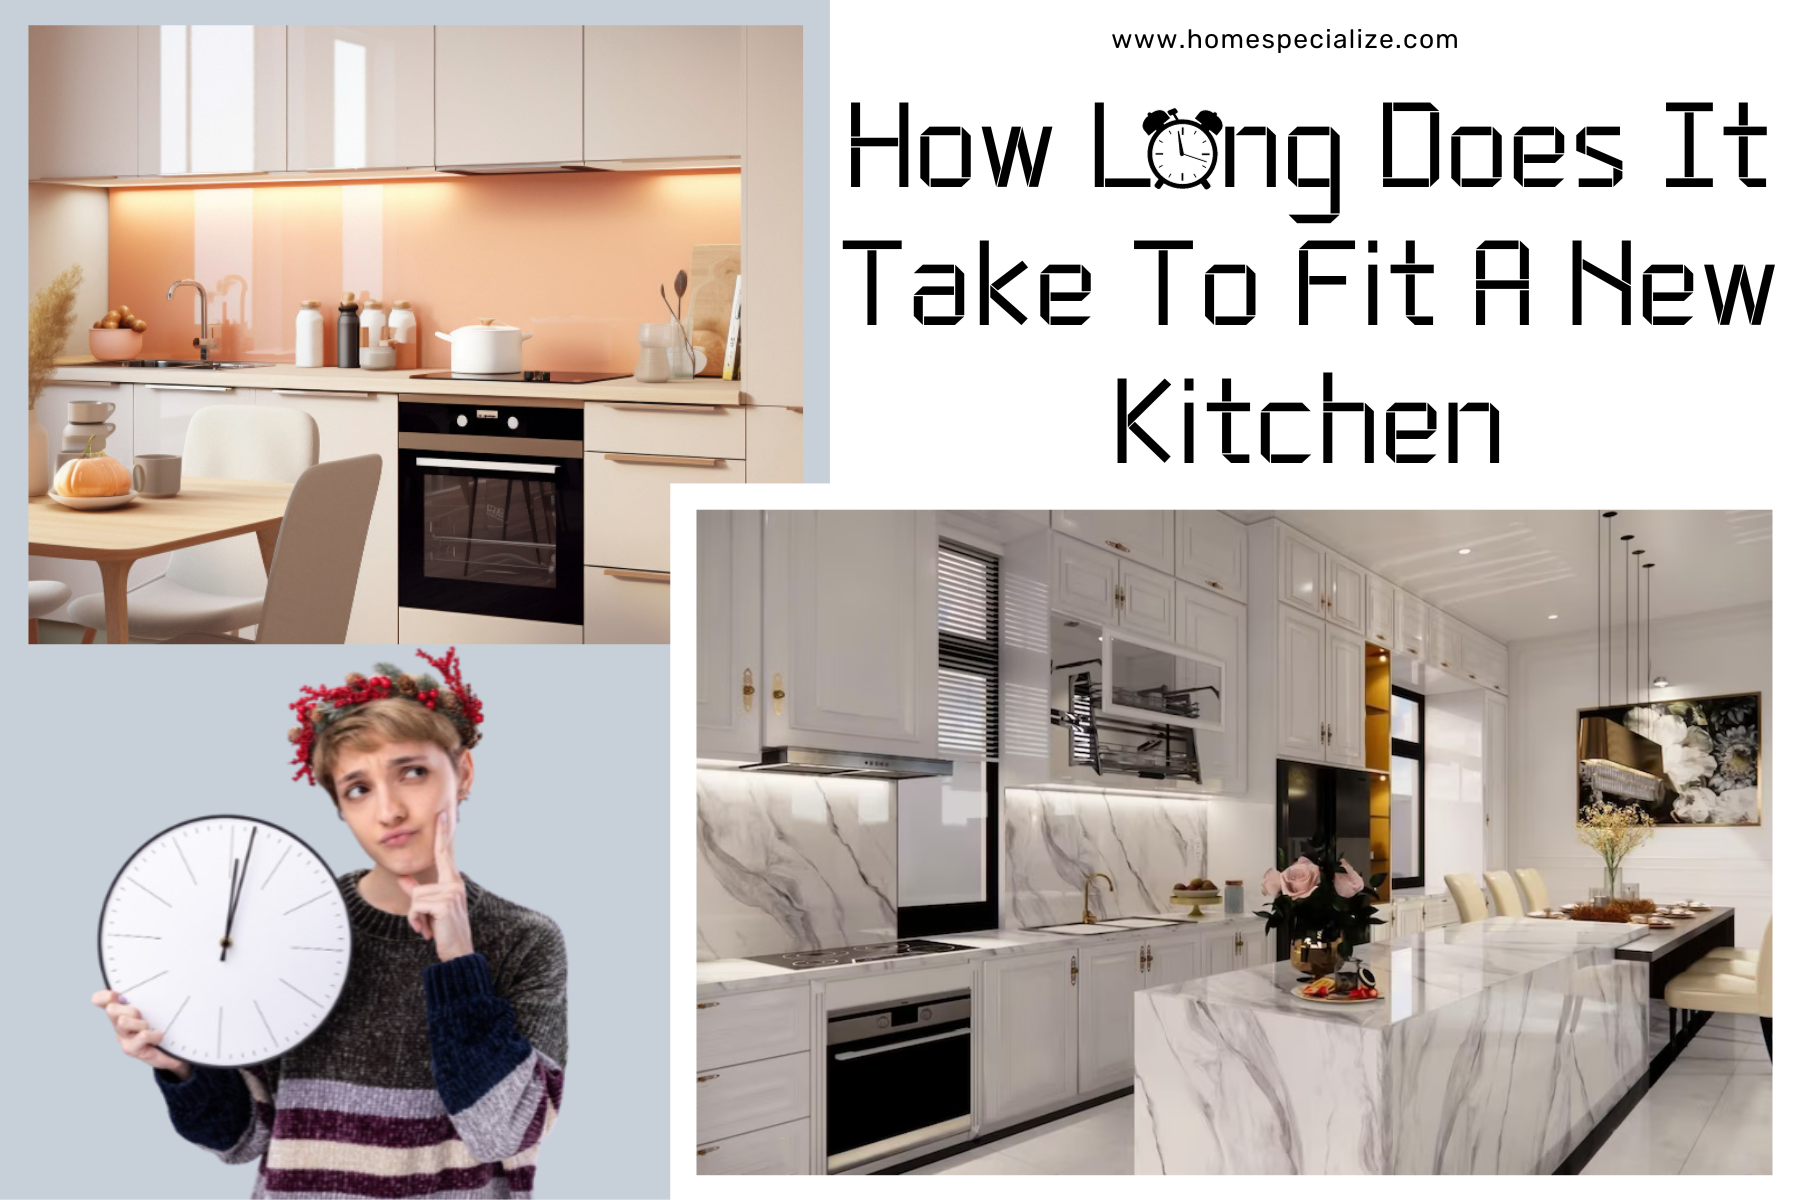 How Long Does It Take to Fit a New Kitchen